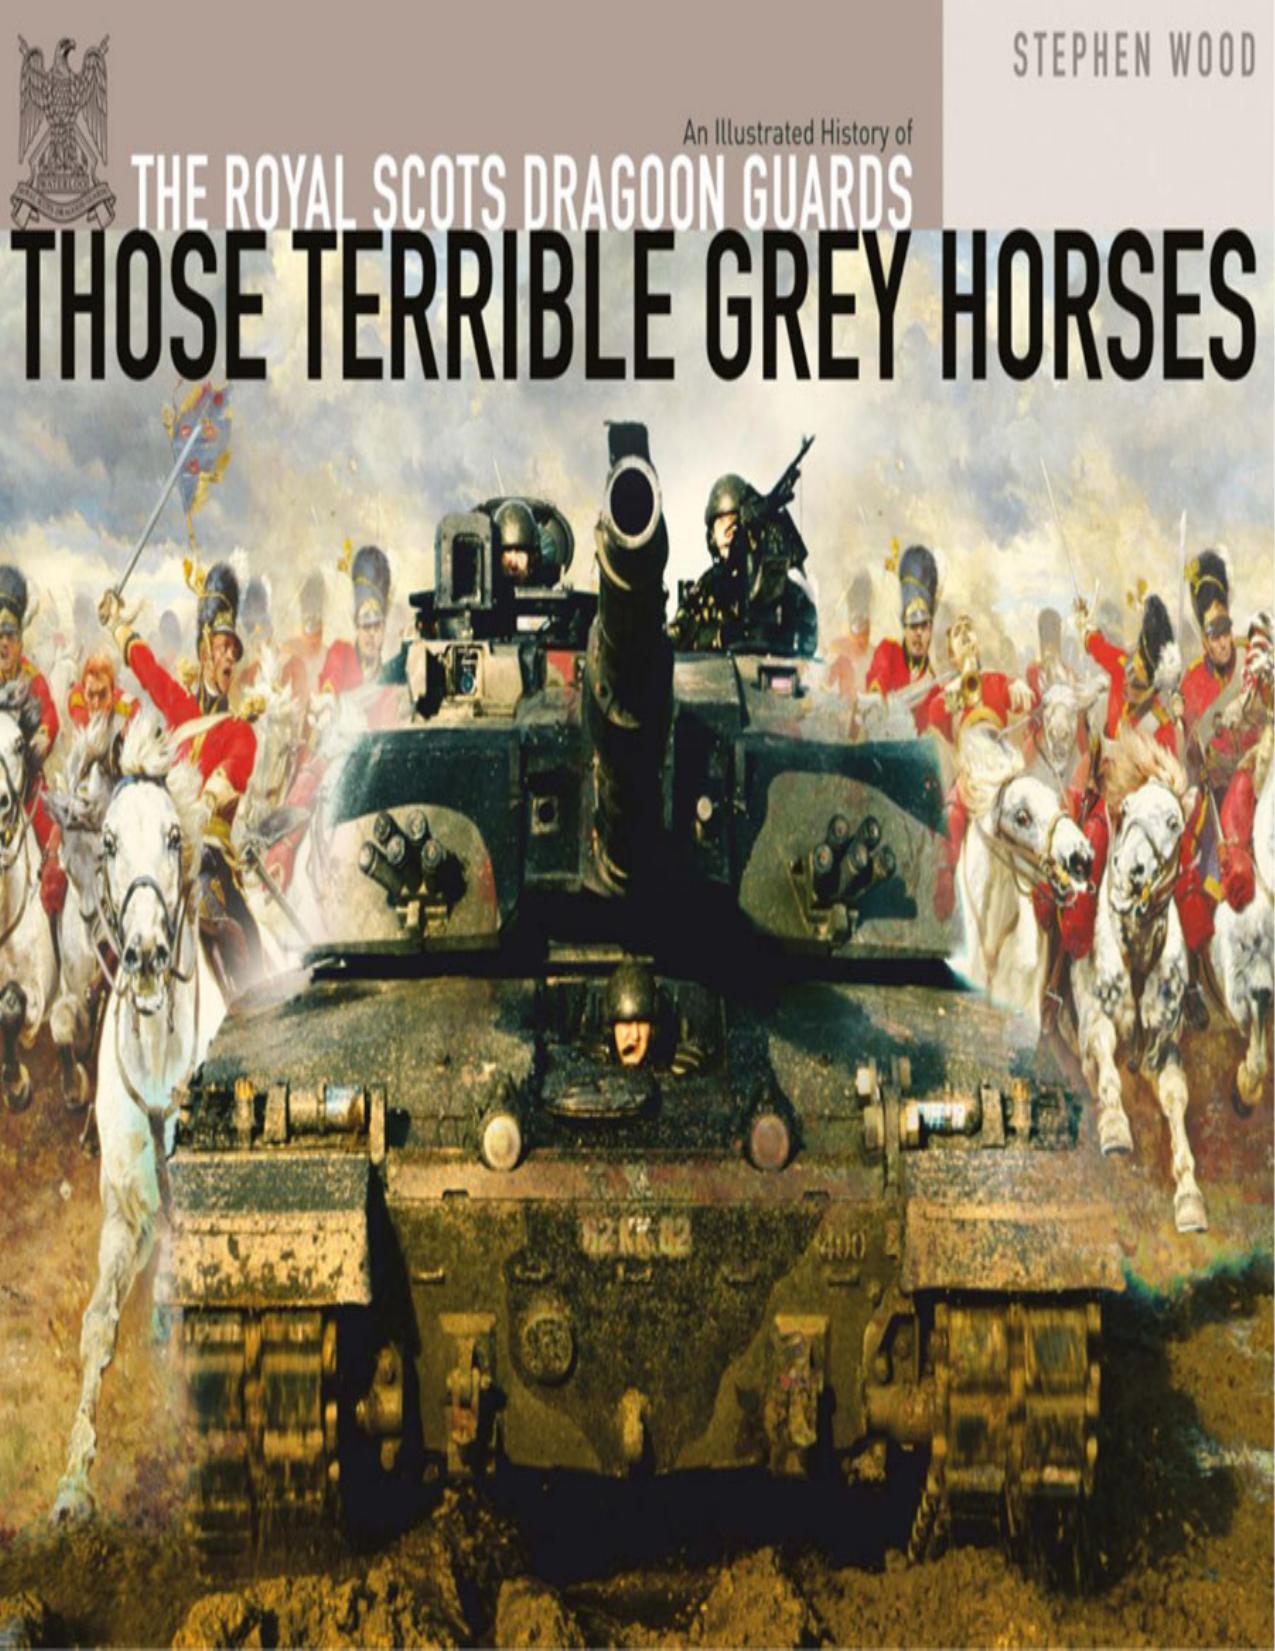 Those Terrible Grey Horses: An Illustrated History of the Royal Scots Dragoon Guards (Osprey General Military) by Stephen Wood